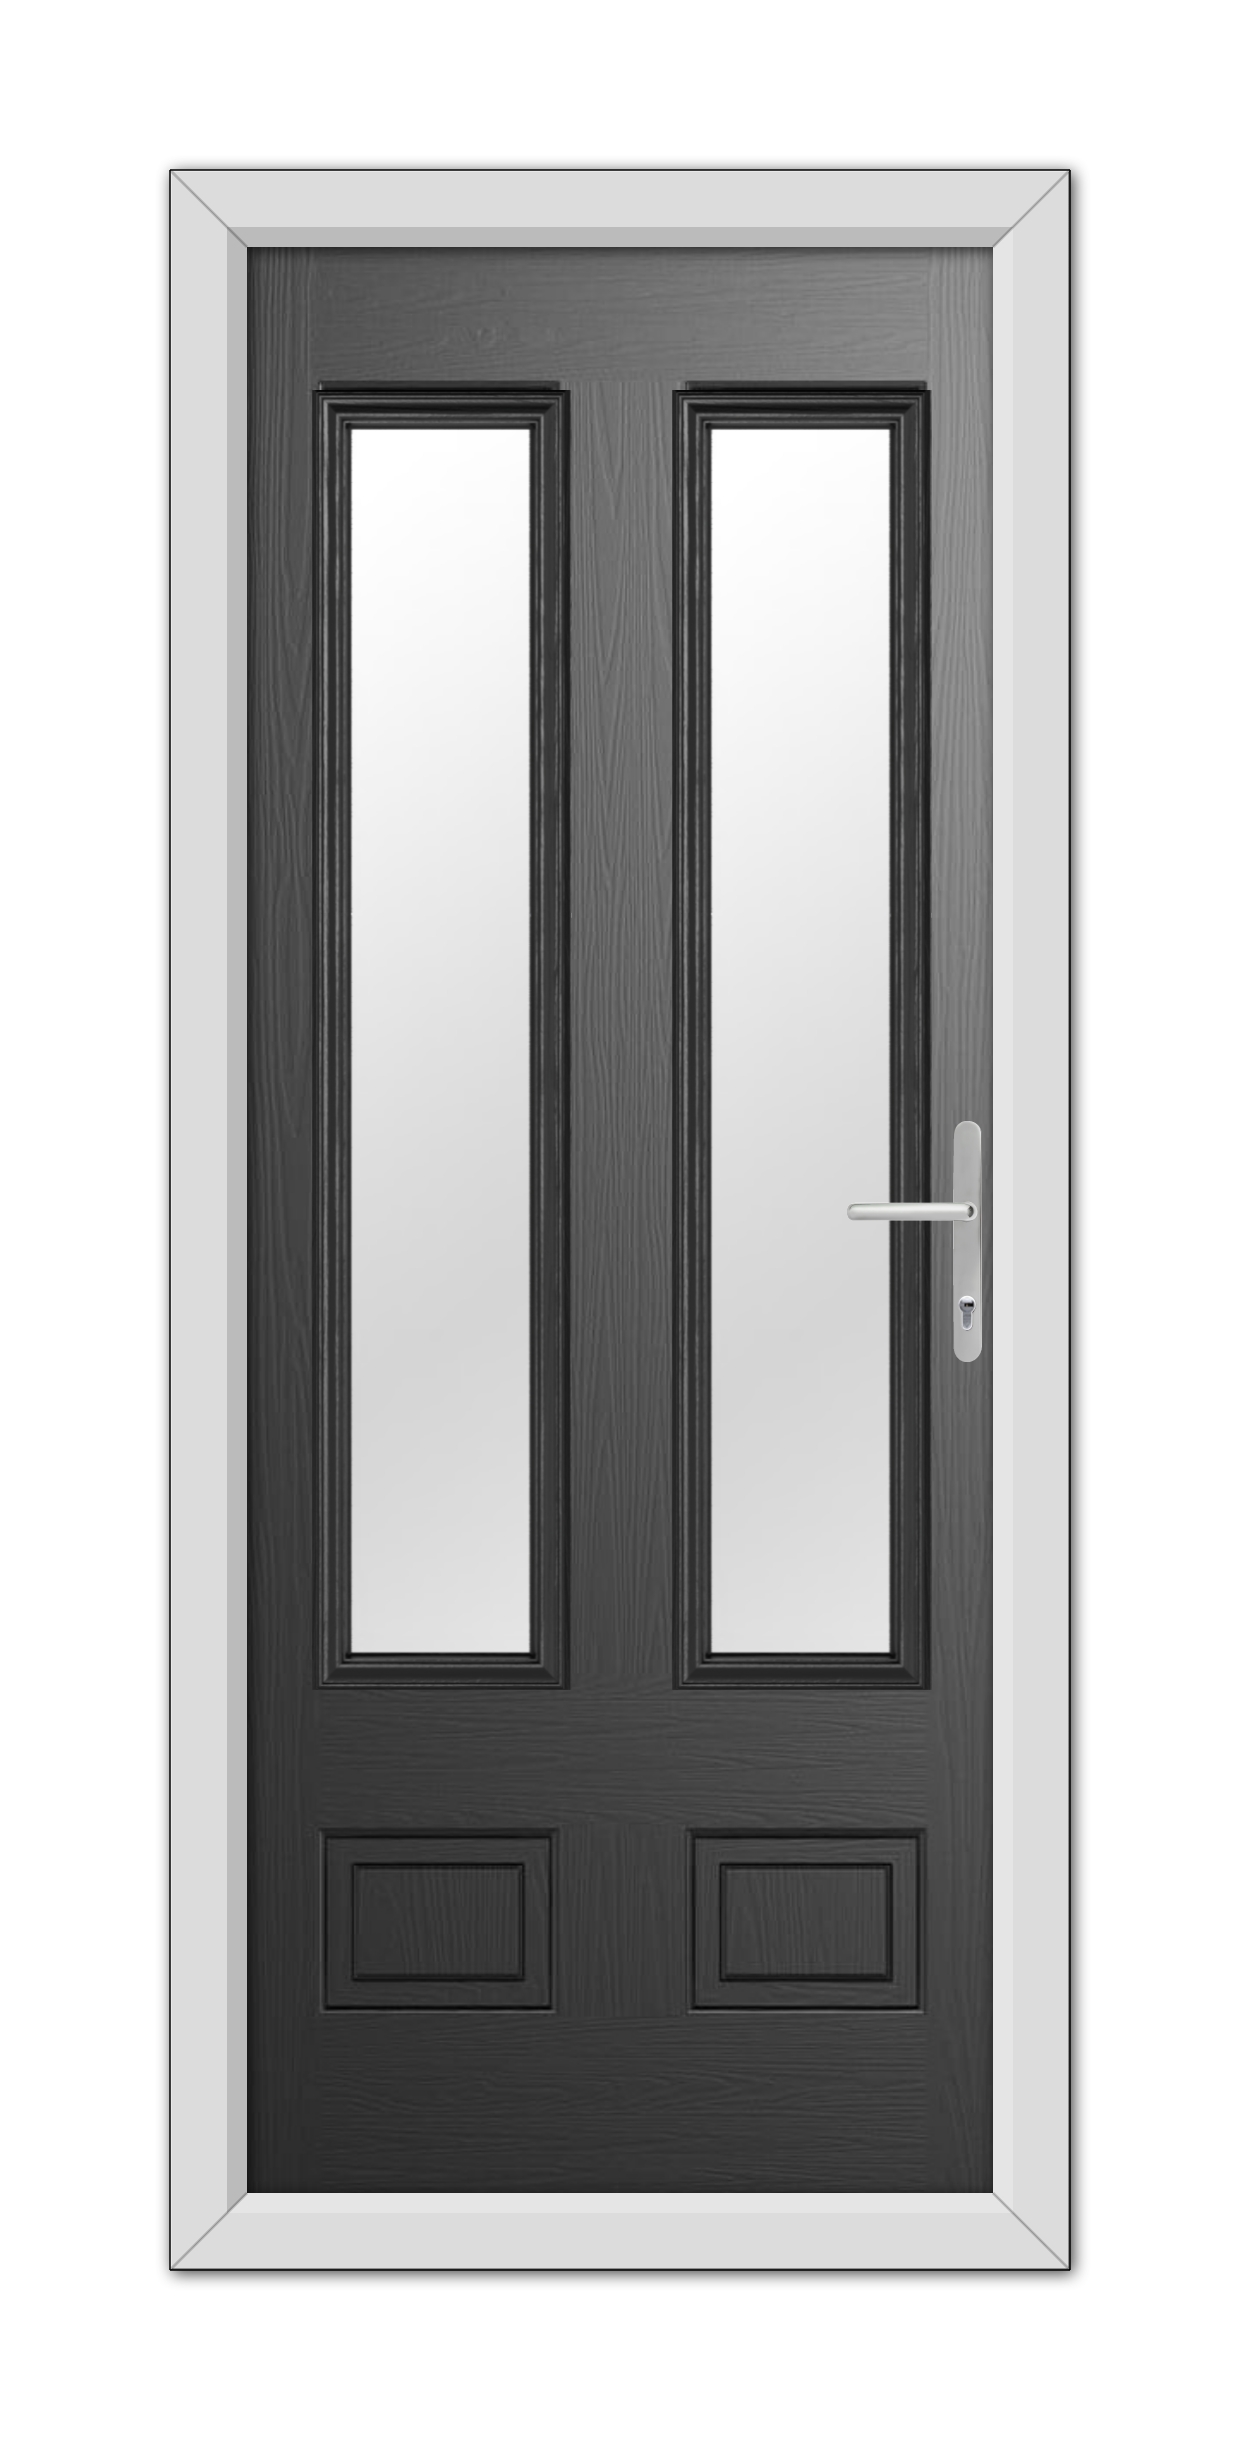 Double door with a sleek Black Aston Glazed 2 Composite Door 48mm Timber Core design and vertical rectangular windows, featuring a modern handle on the right side.